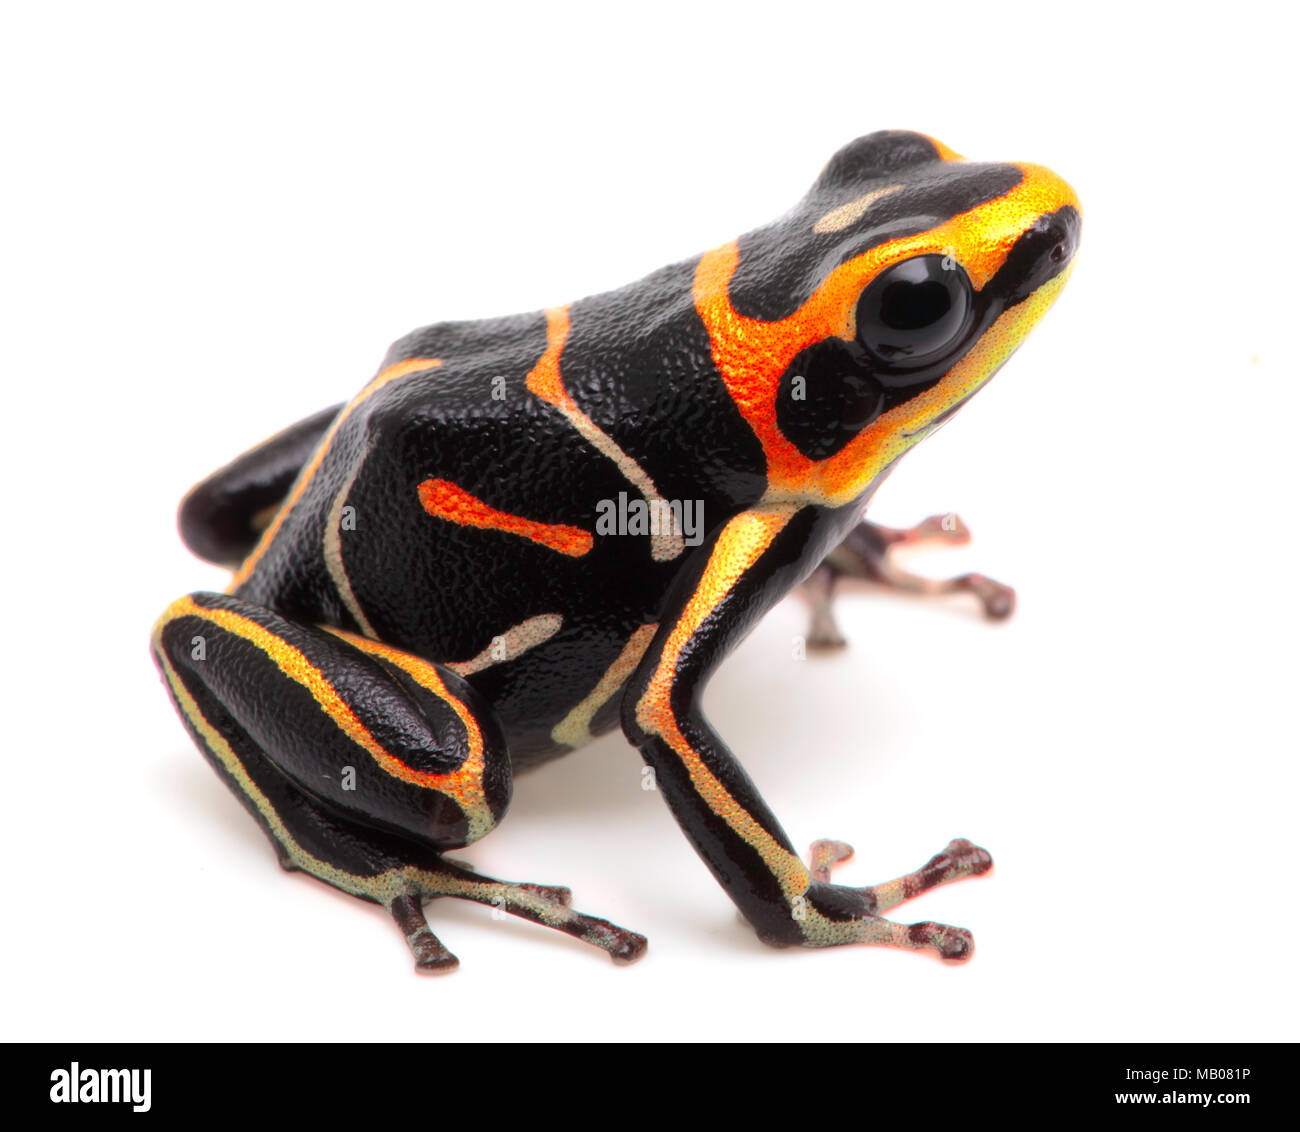 striped  poison dart or arrow frog, Ranitomeya fantastica. A beautiful small poisonous animal from the Amazon rain forest in Peru. Isolated on white b Stock Photo